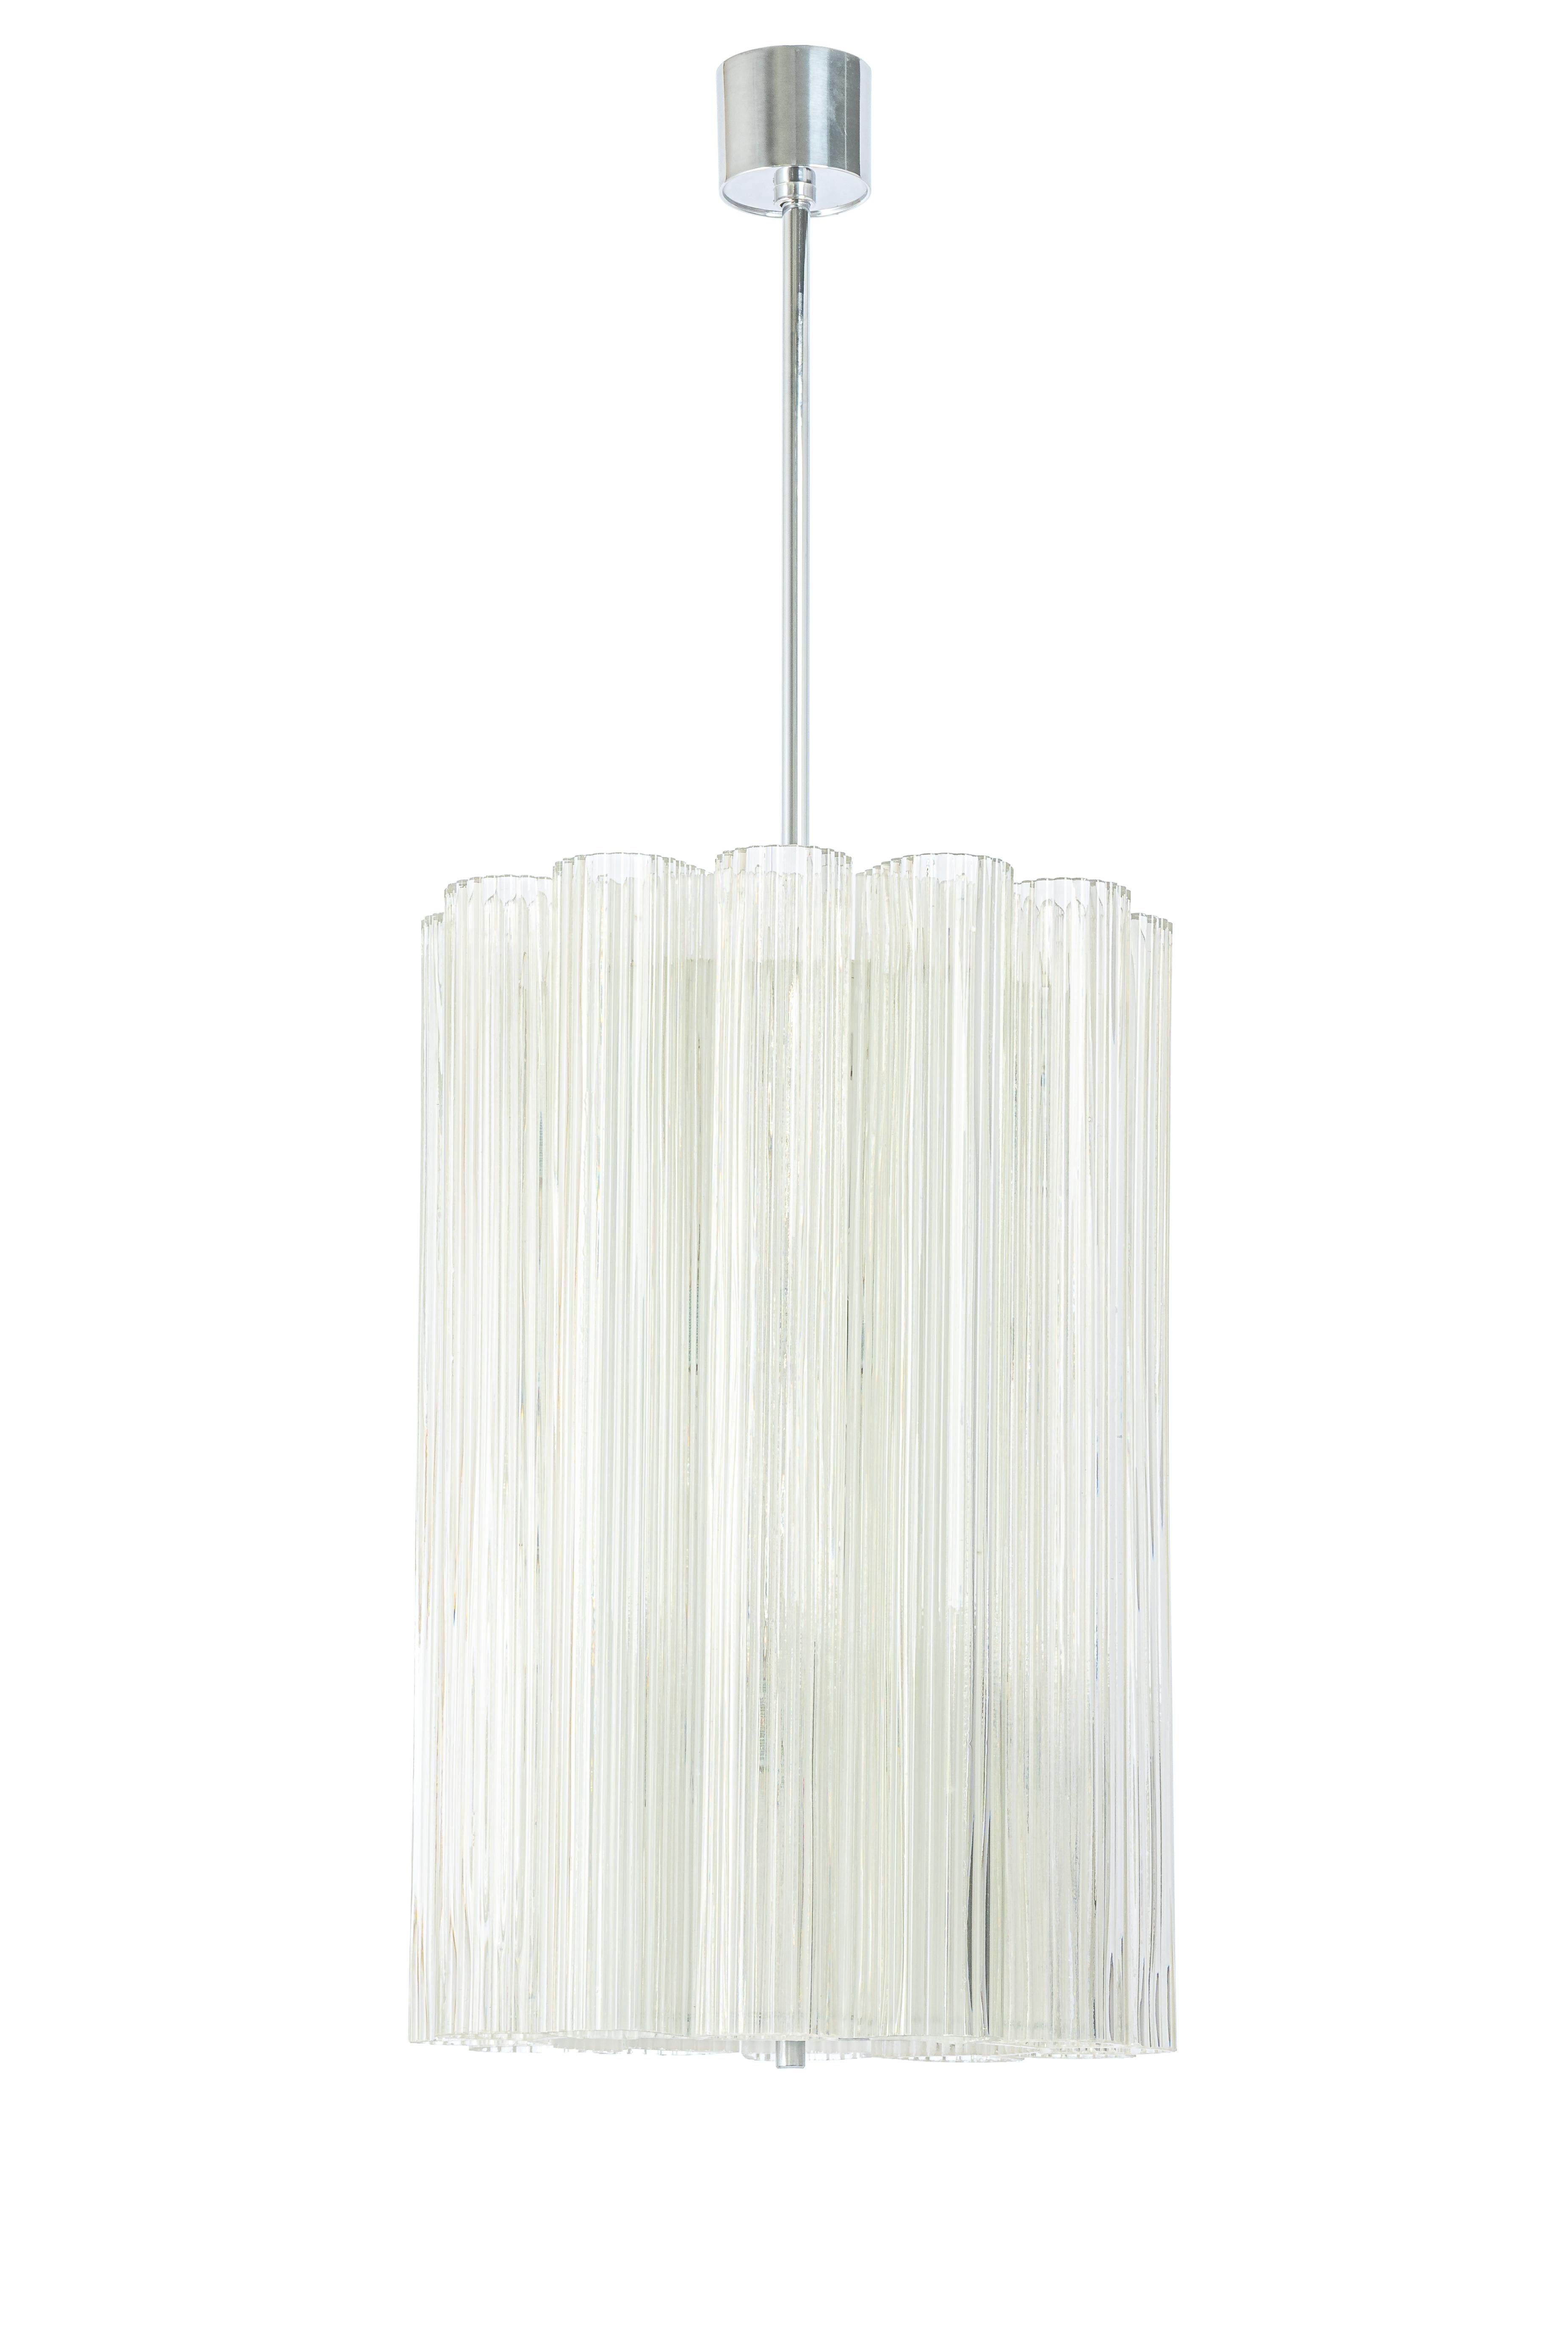 1 of 2 Cylindrical Pendant Fixture with Crystal Glass by Doria, Germany, 1960s For Sale 1